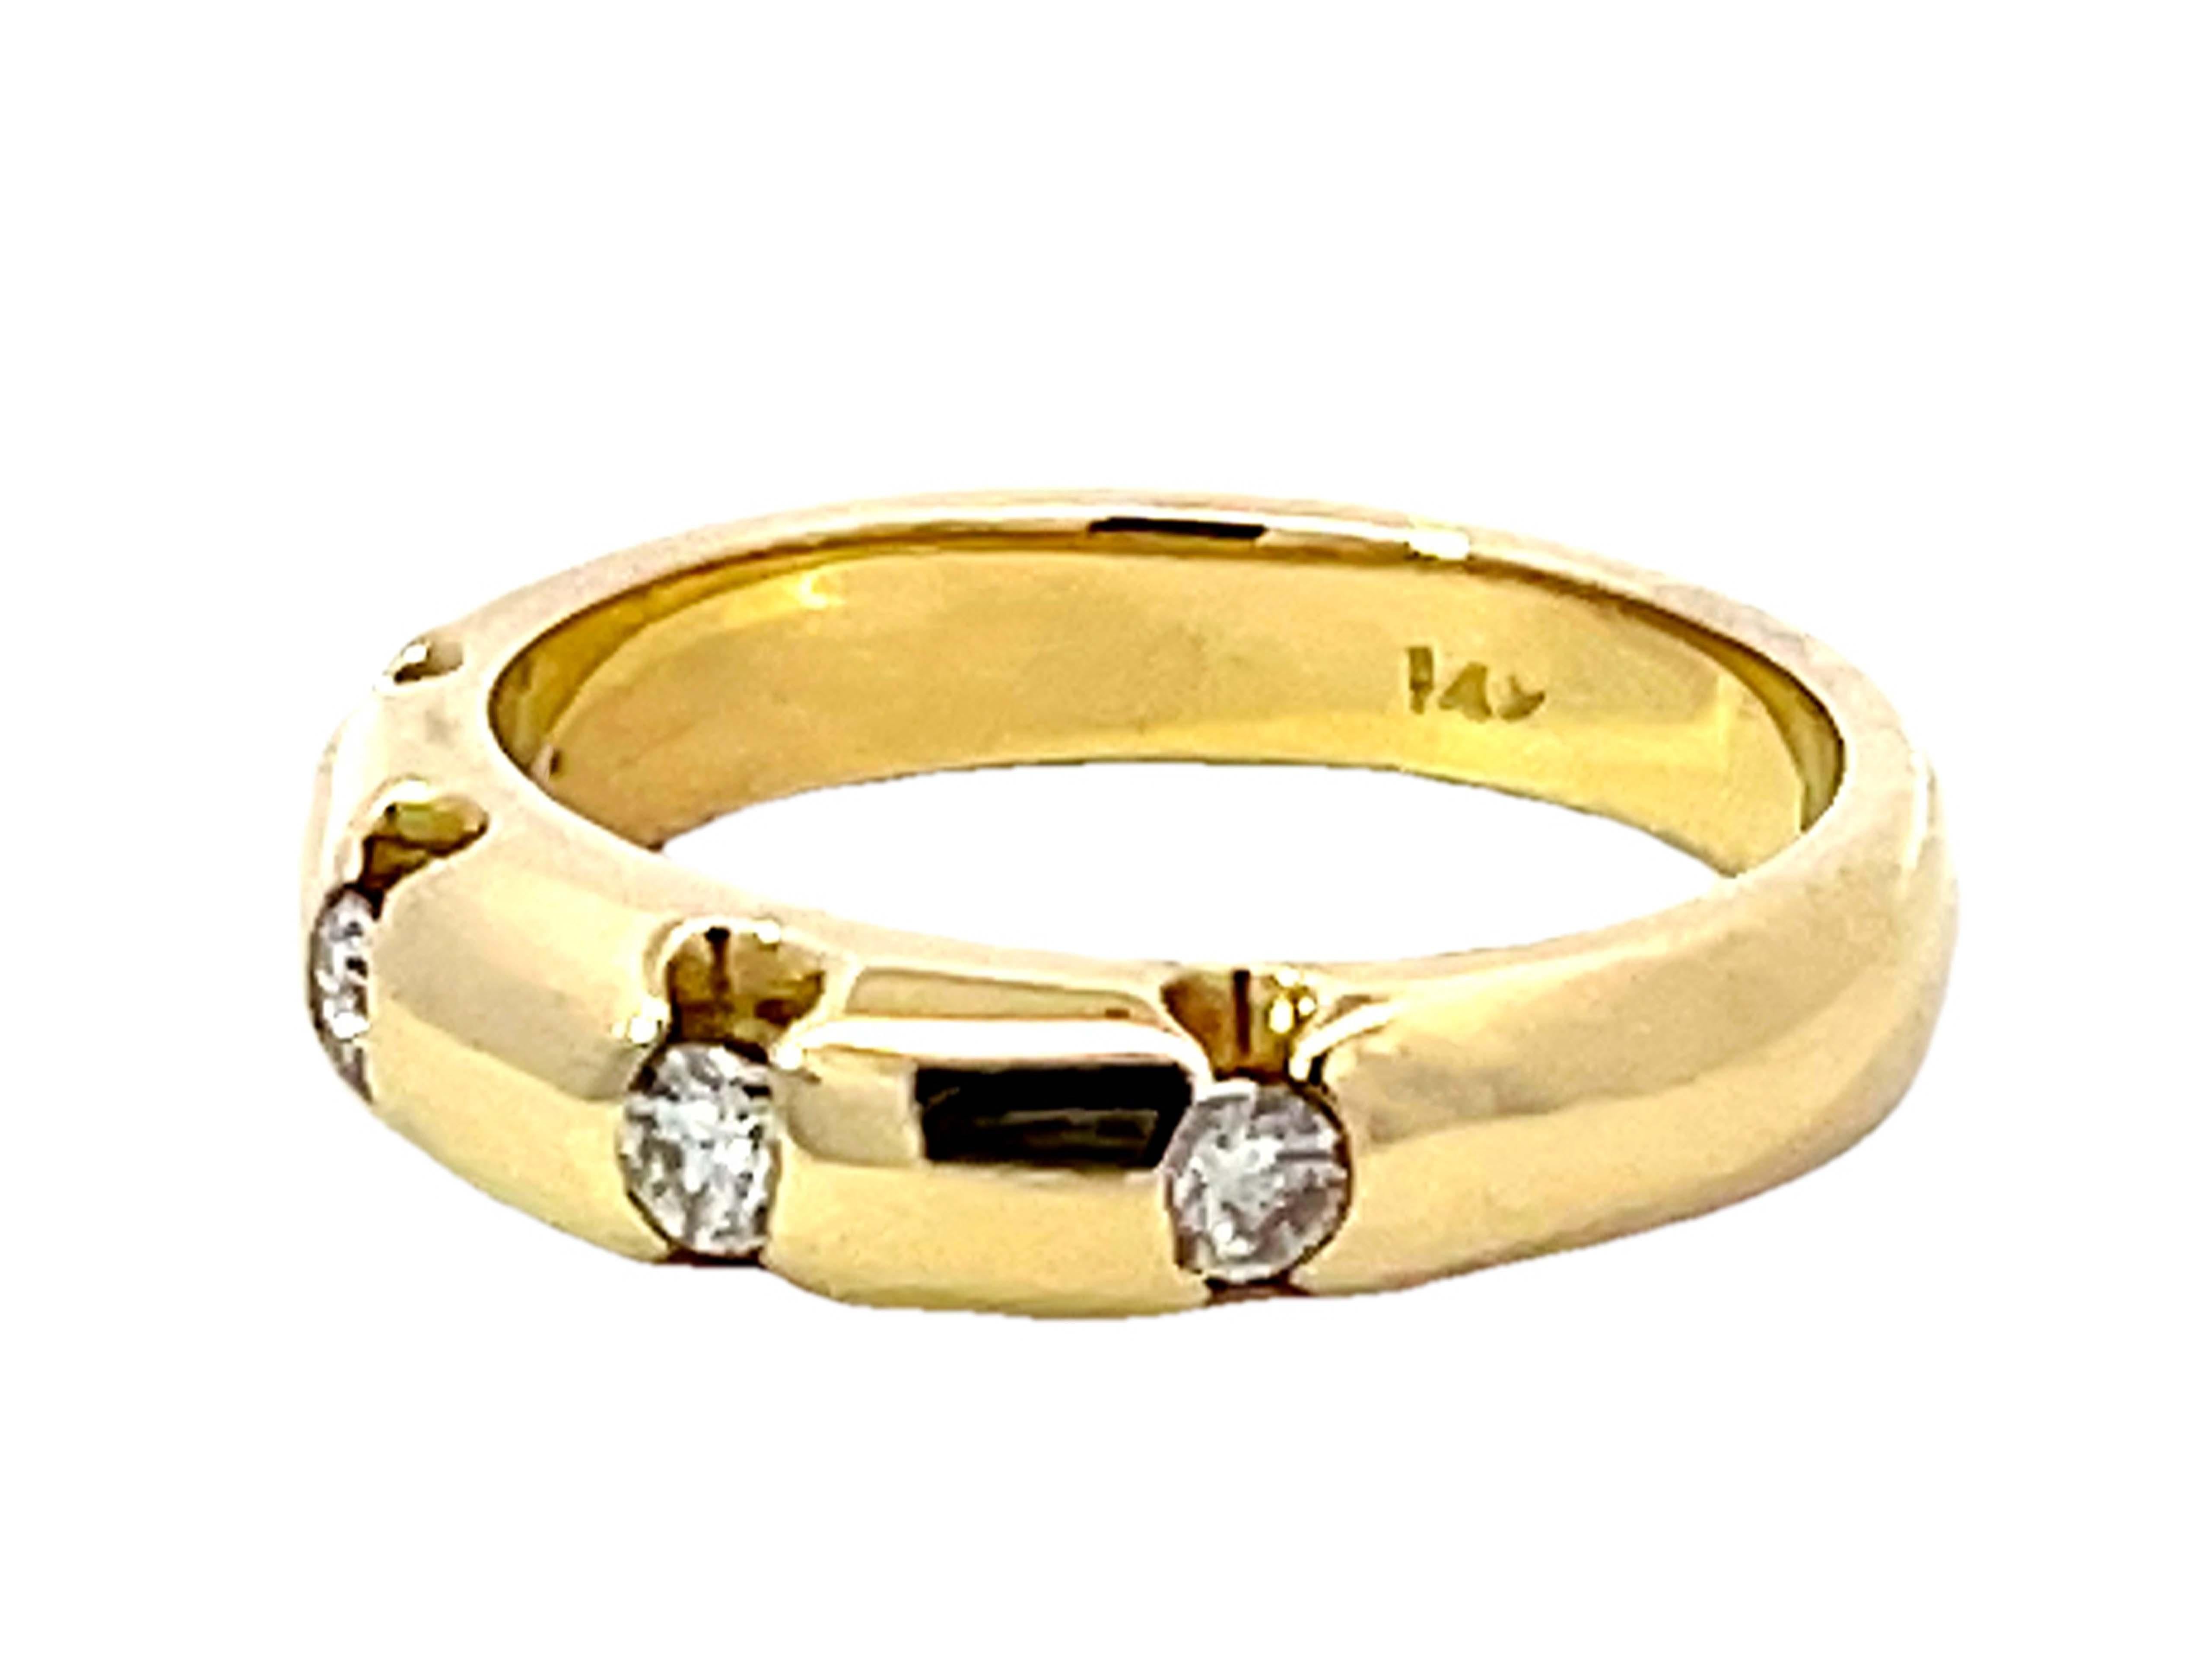 4 Brilliant Cut Diamond Band Ring Solid 14k Yellow Gold In New Condition For Sale In Honolulu, HI